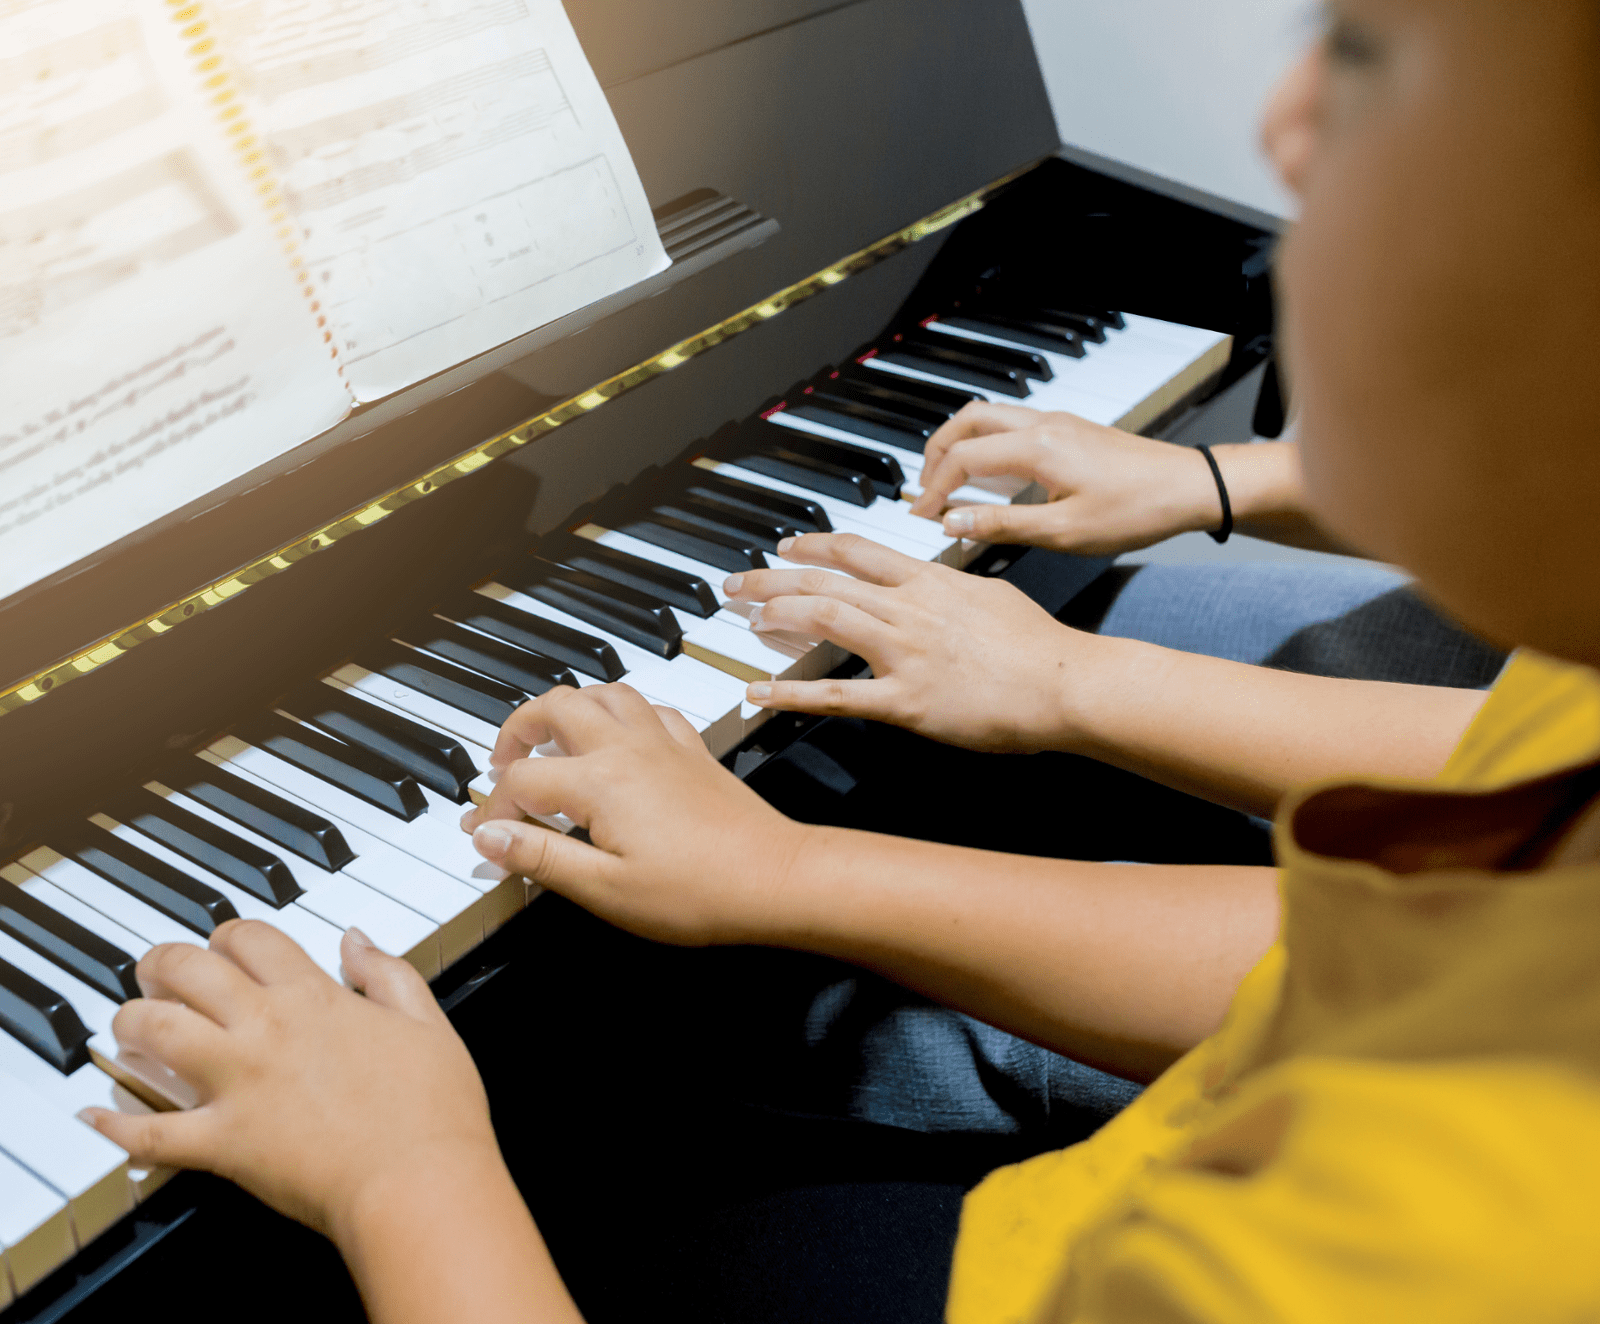 Piano lessons for children and teens at Serenata Music Studio in Chester, NJ